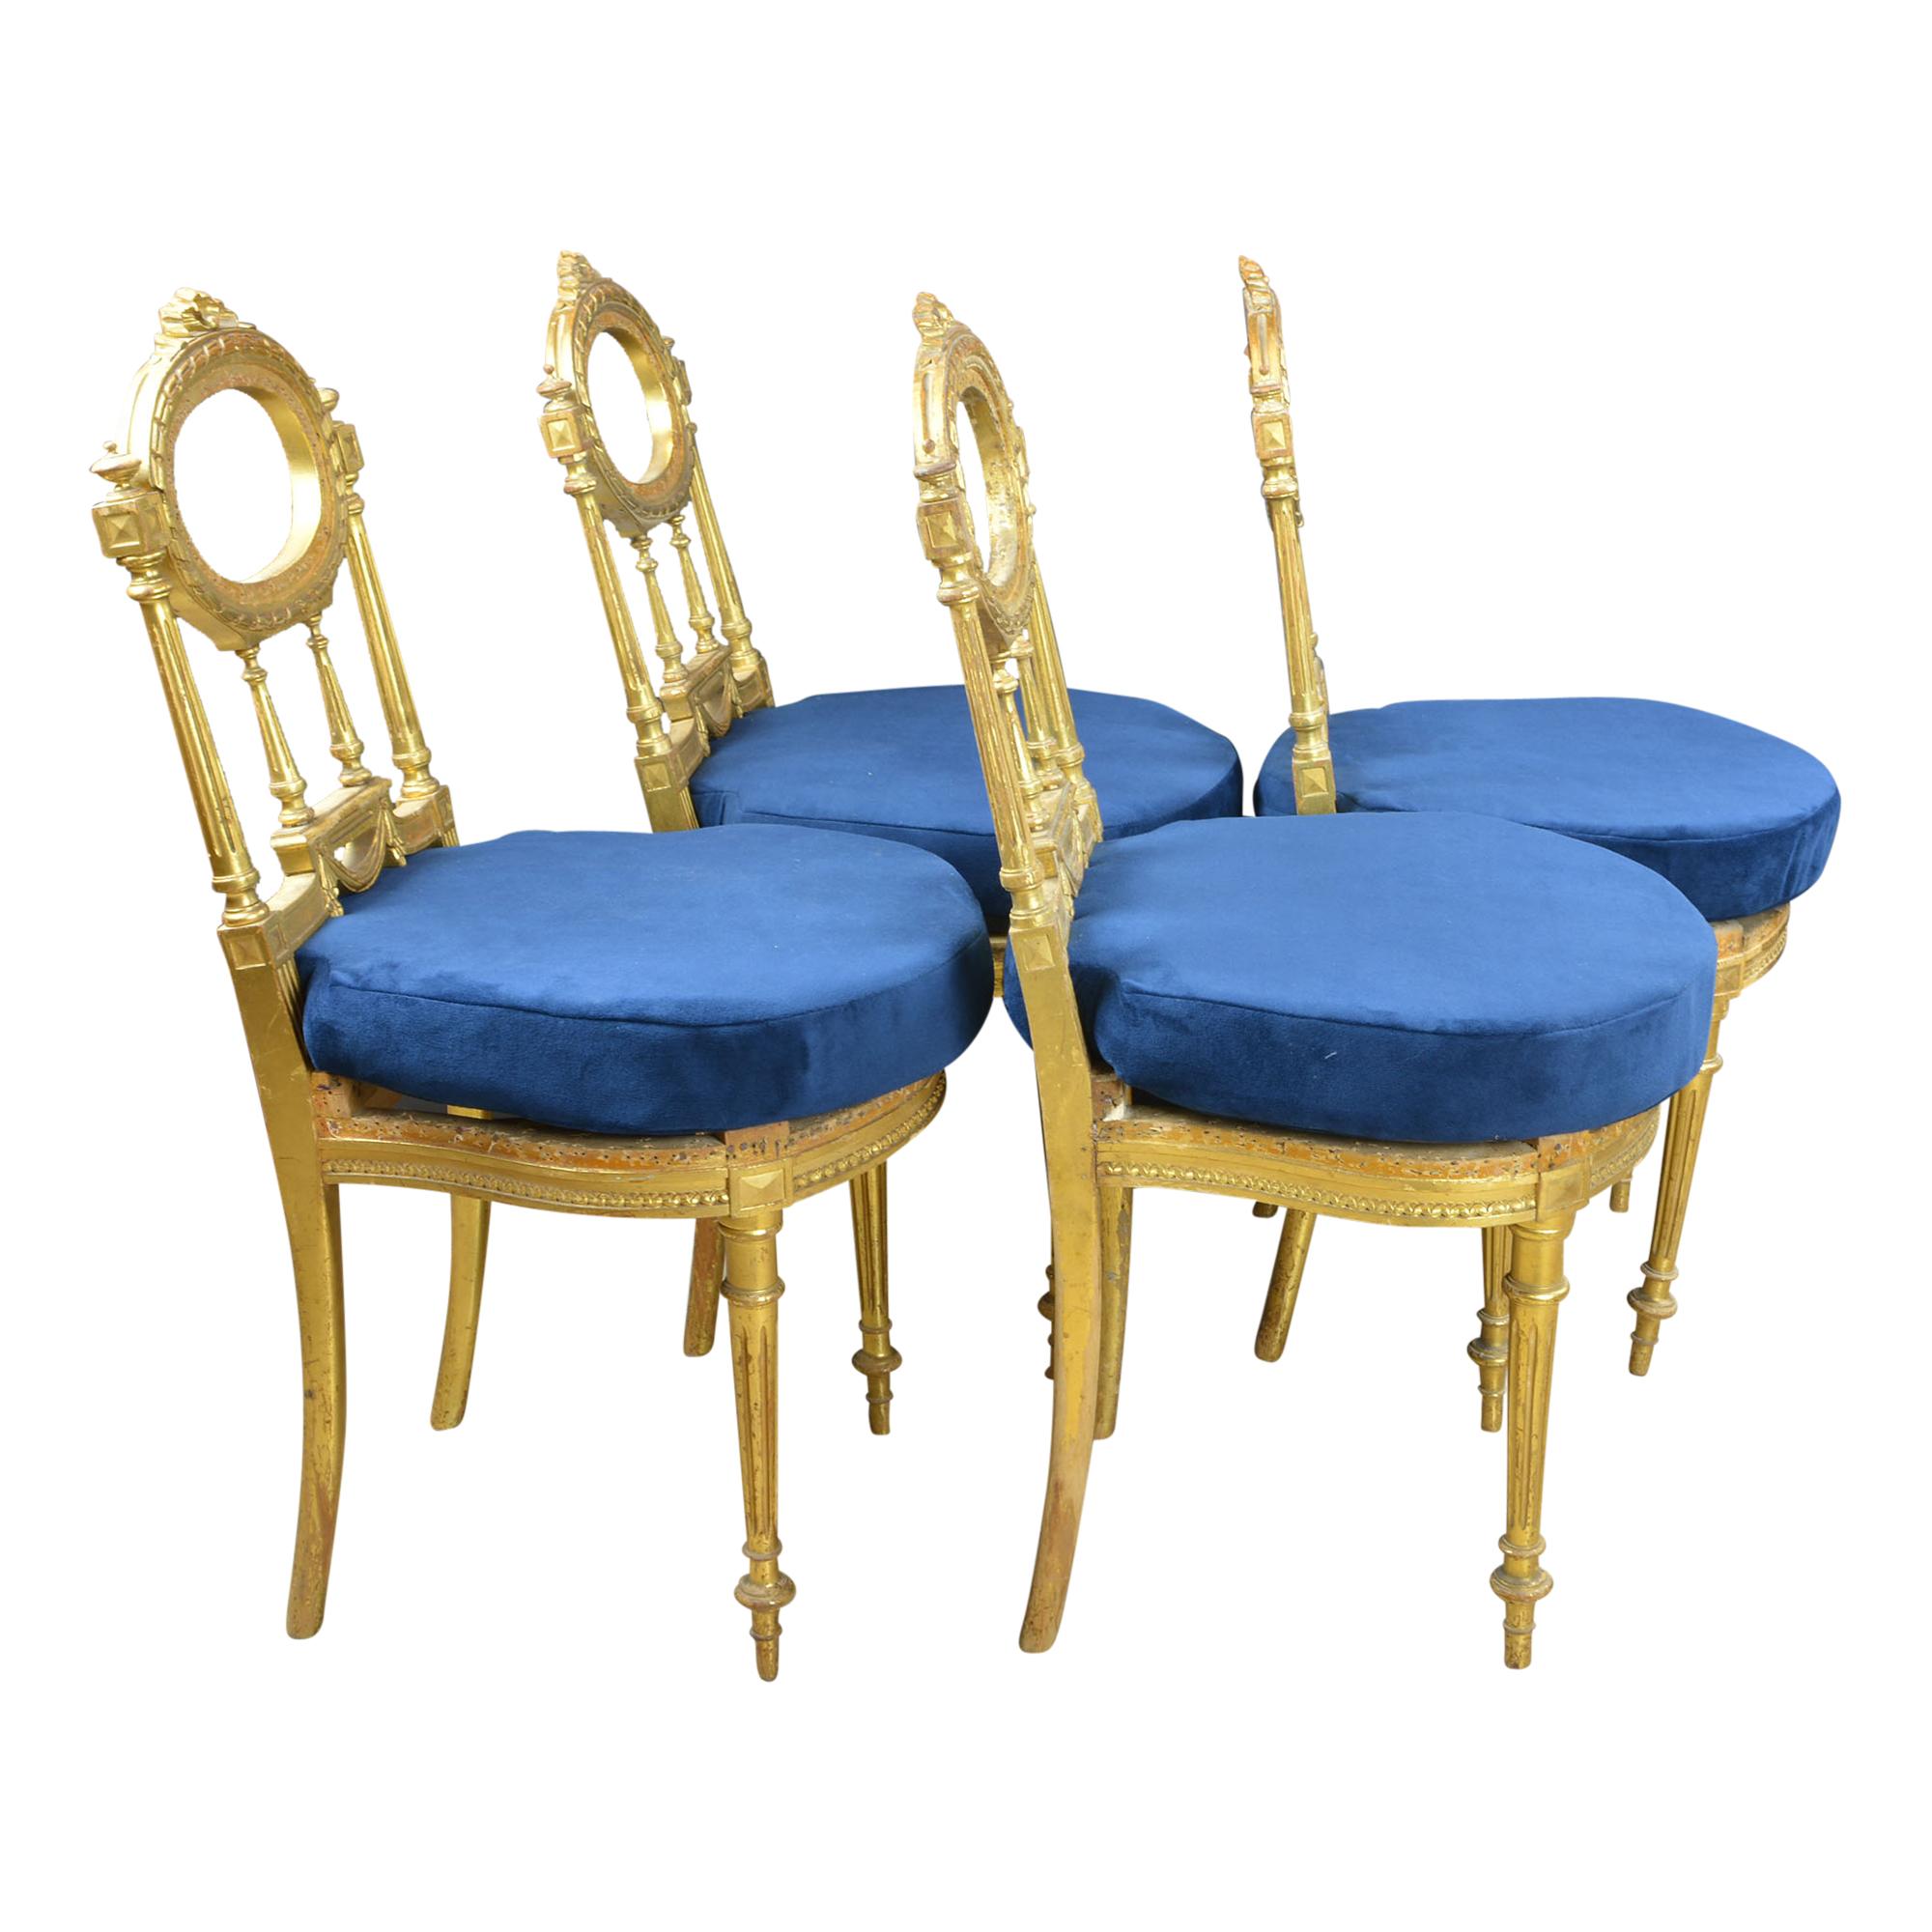 Antique Giltwood Chairs with Blue Velvet Cushions Set of 4 For Sale 1